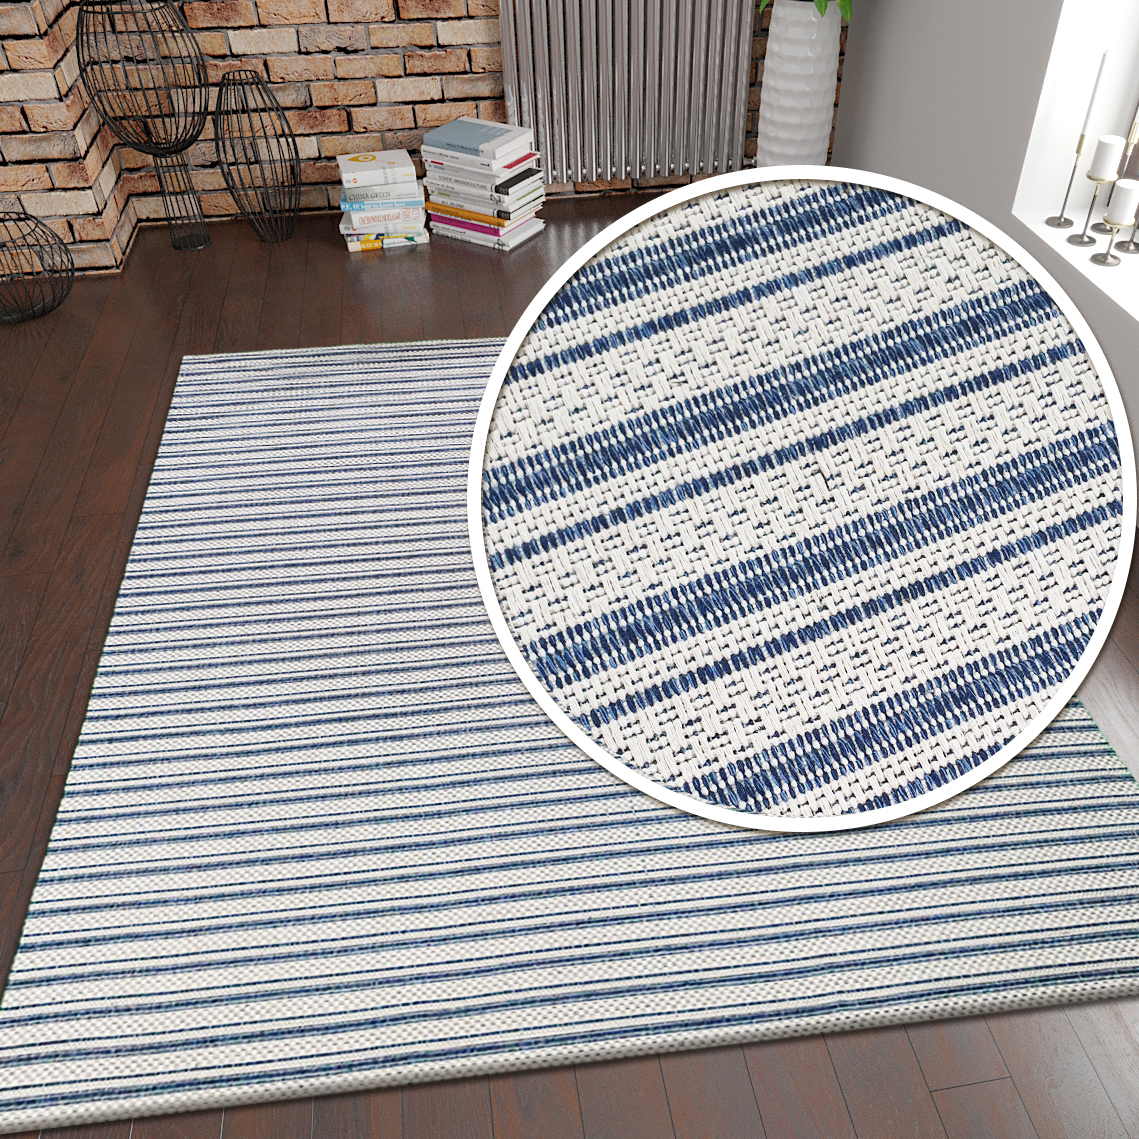 Cotton Rug Blue Cream Striped | Rugs Dropshipping, Wholesale of Rugs ...